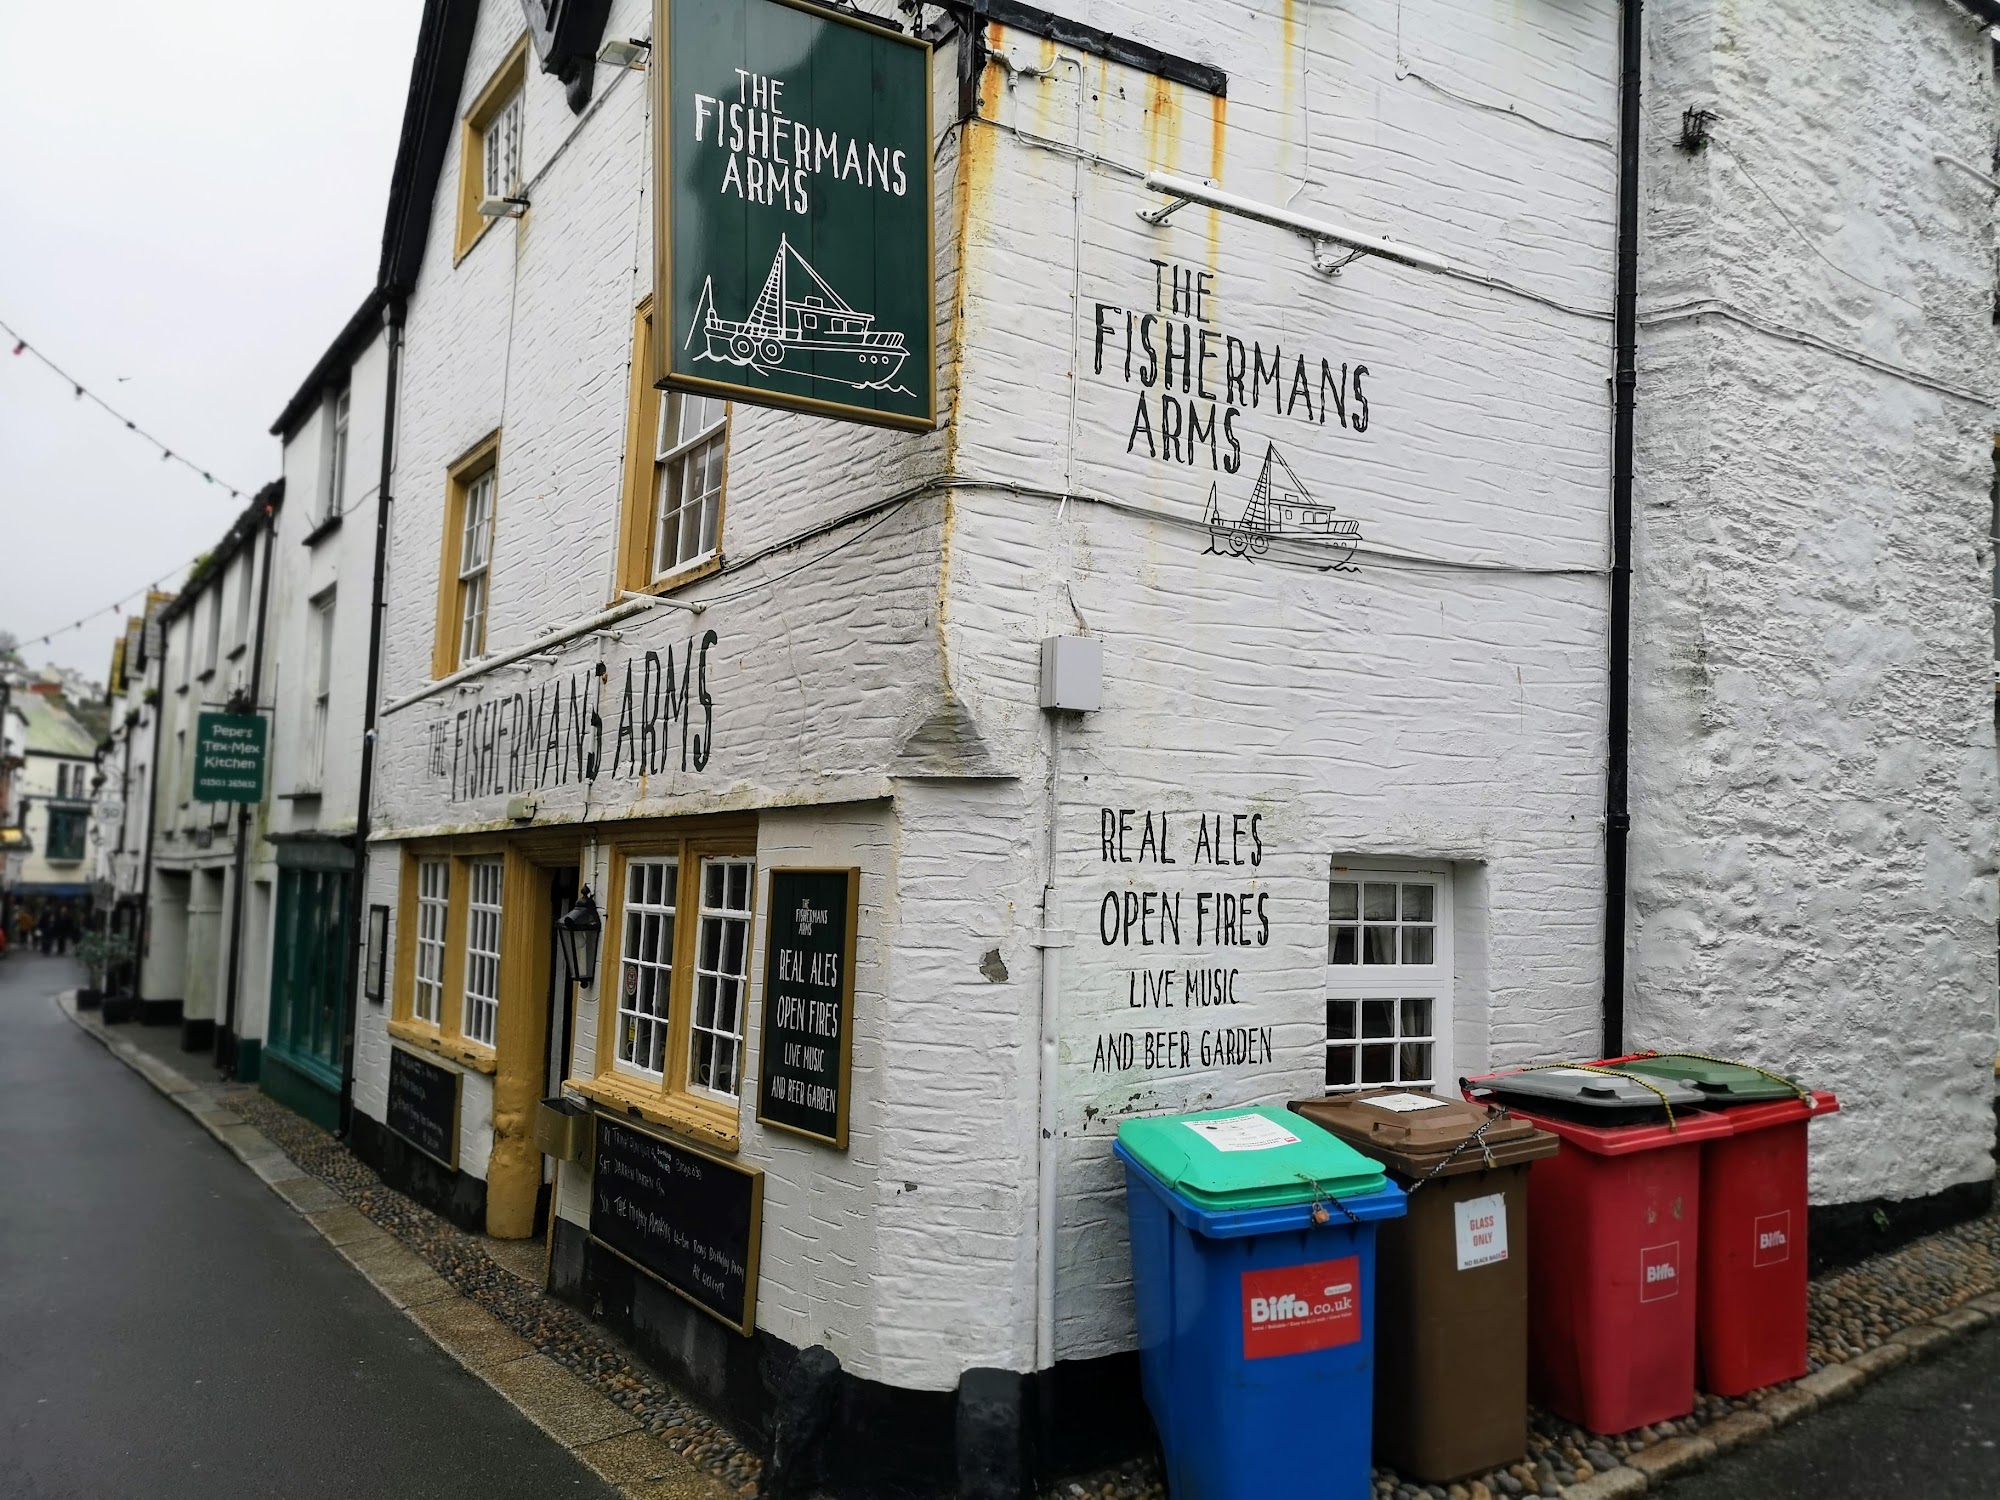 The Fishermans Arms